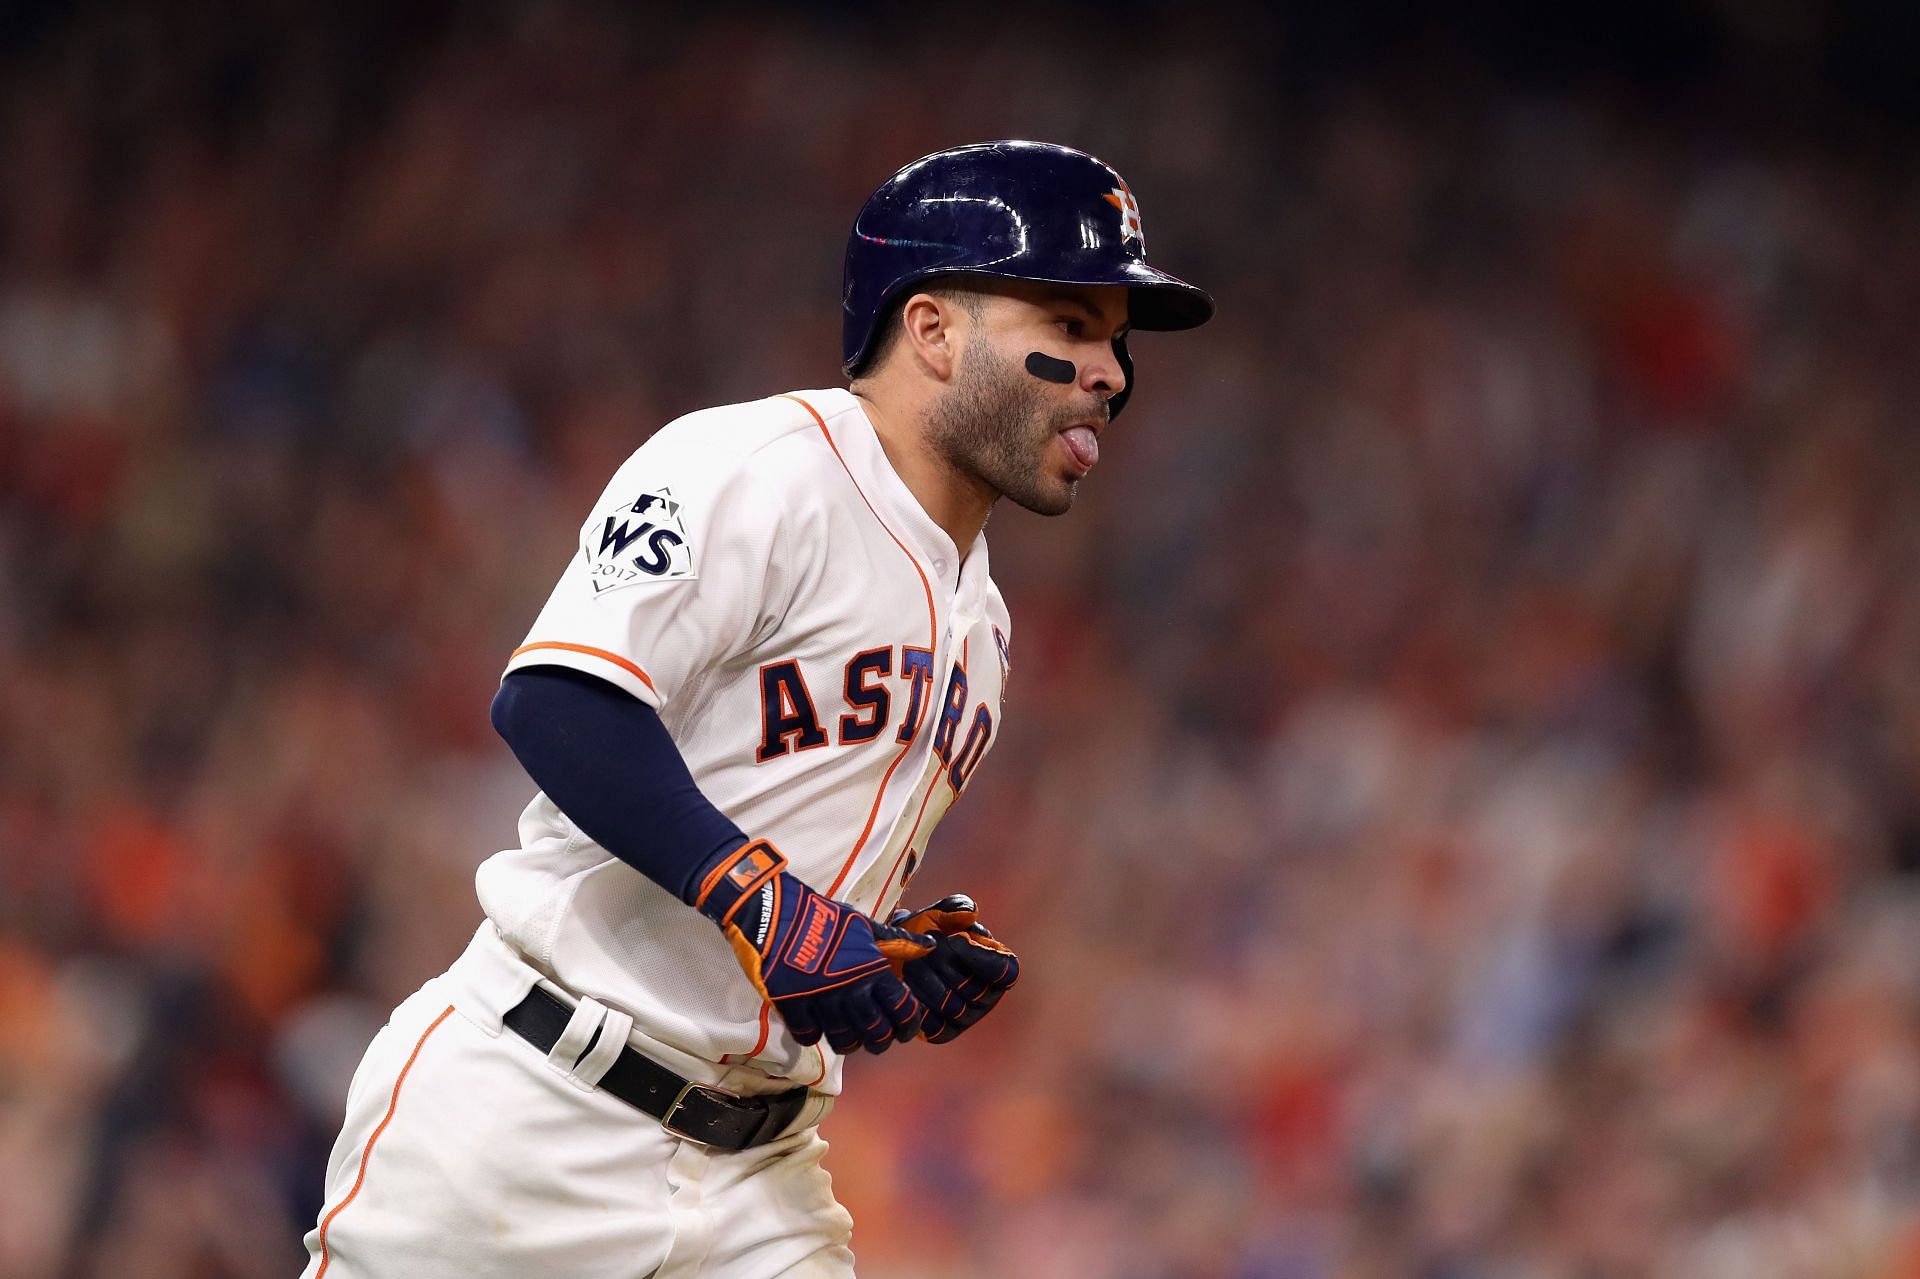 Jose Altuve of the Houston Astros reacts after hitting a three-run home run during the fifth inning against the Los Angeles Dodgers in game five of the 2017 World Series at Minute Maid Park on October 29, 2017, in Houston, Texas.